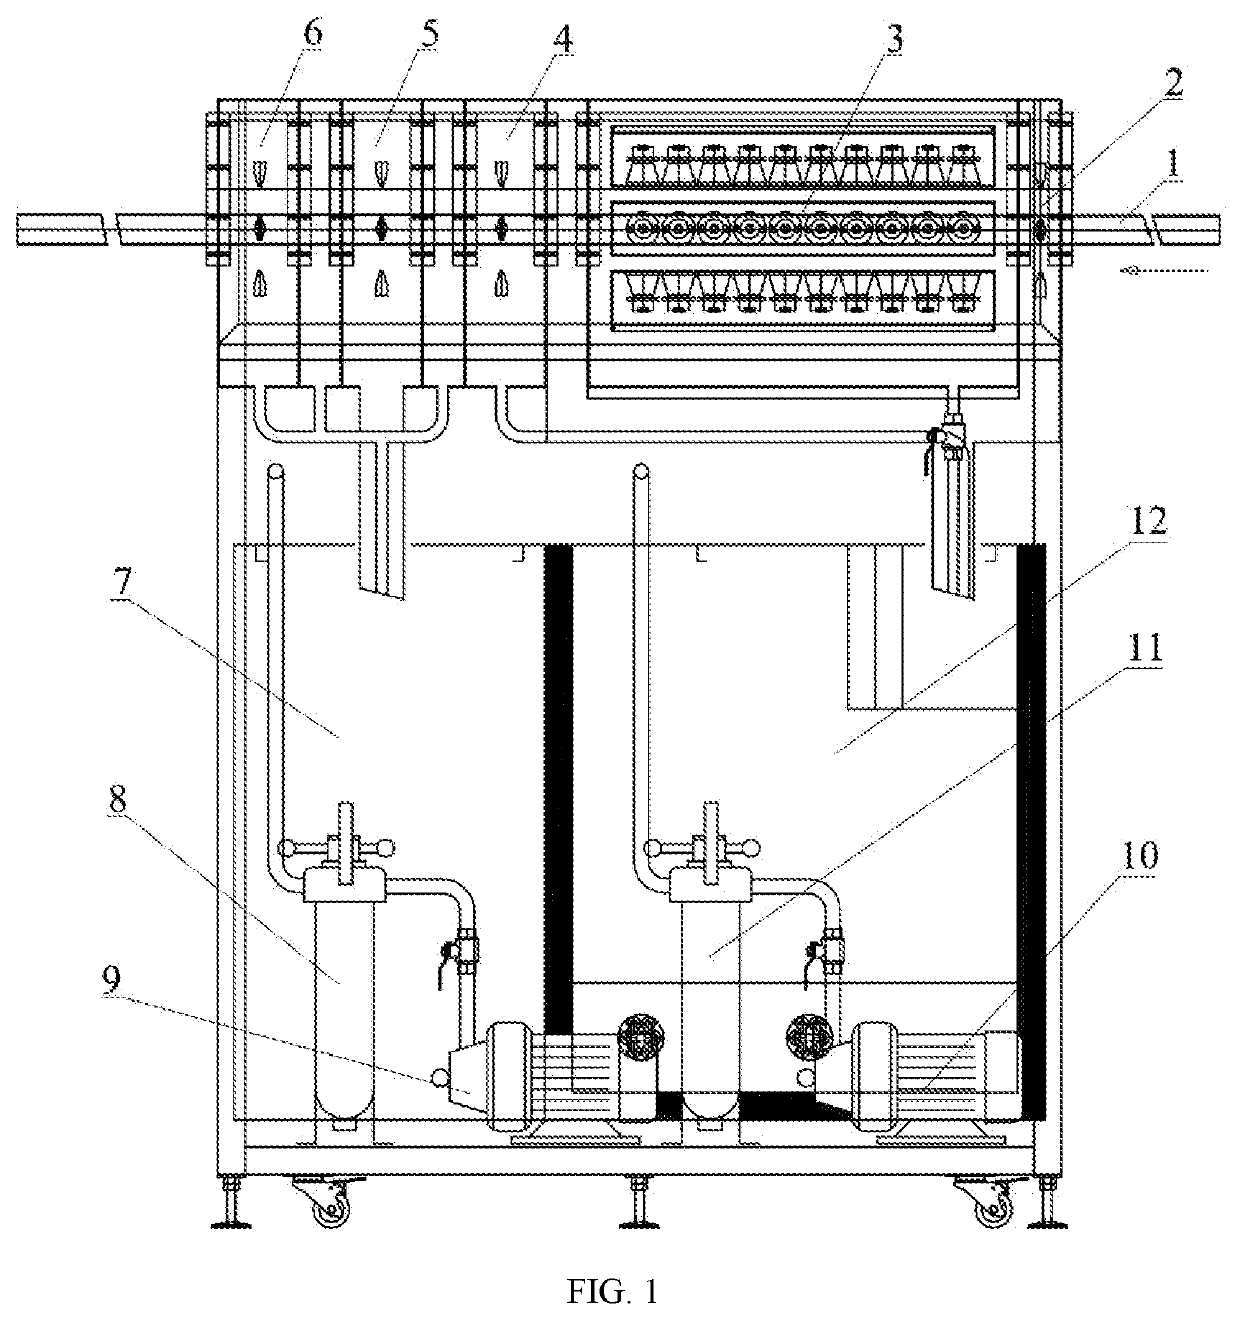 Feed-through ultrasonic cleaning system for winding of large-sized superconducting coils